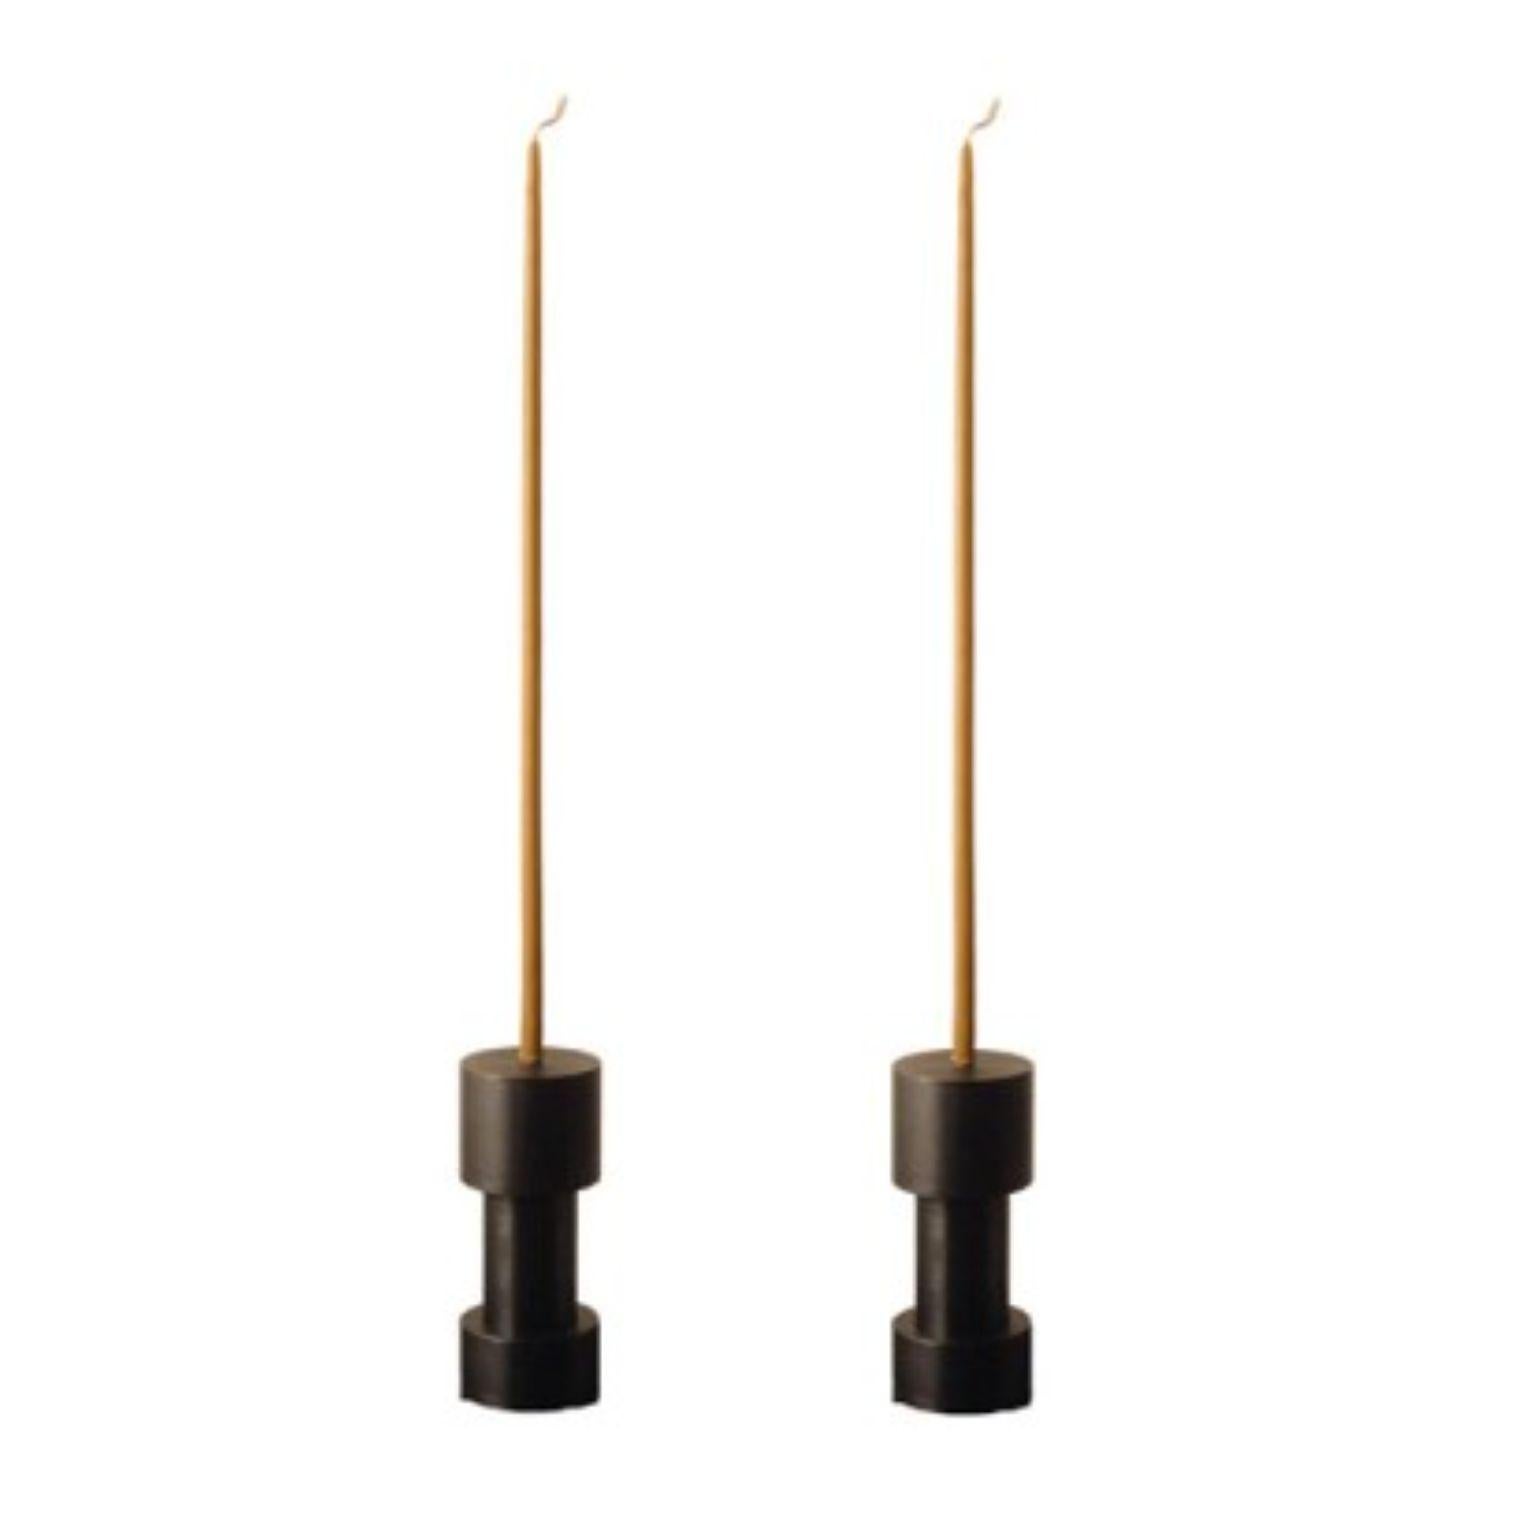 Set of 2 steel another candleholders by Radu Abraham
Materials: steel
Dimensions: D8 x H14cm

3 Piece candle holder; can be used with multiple types of candles or with standard candle pill; if detached from each other, each element can be used